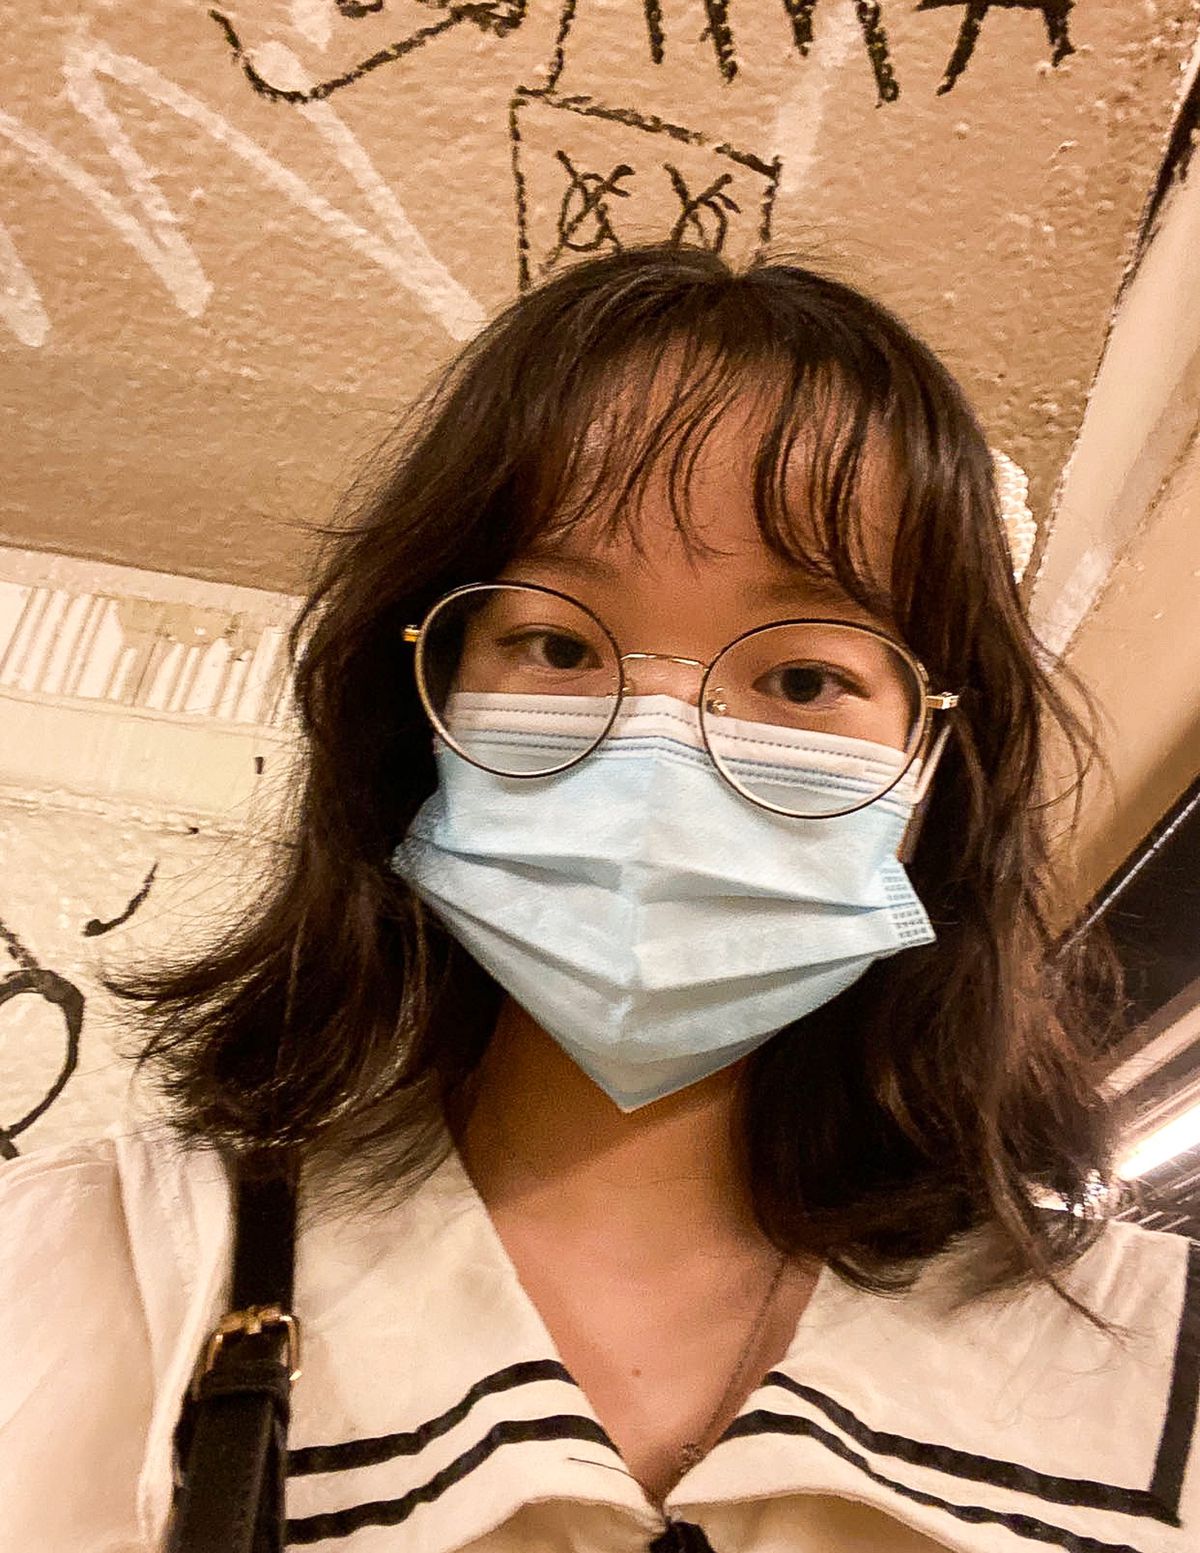 A teenage girl poses for a selfie, wearing glasses and a blue surgical mask.